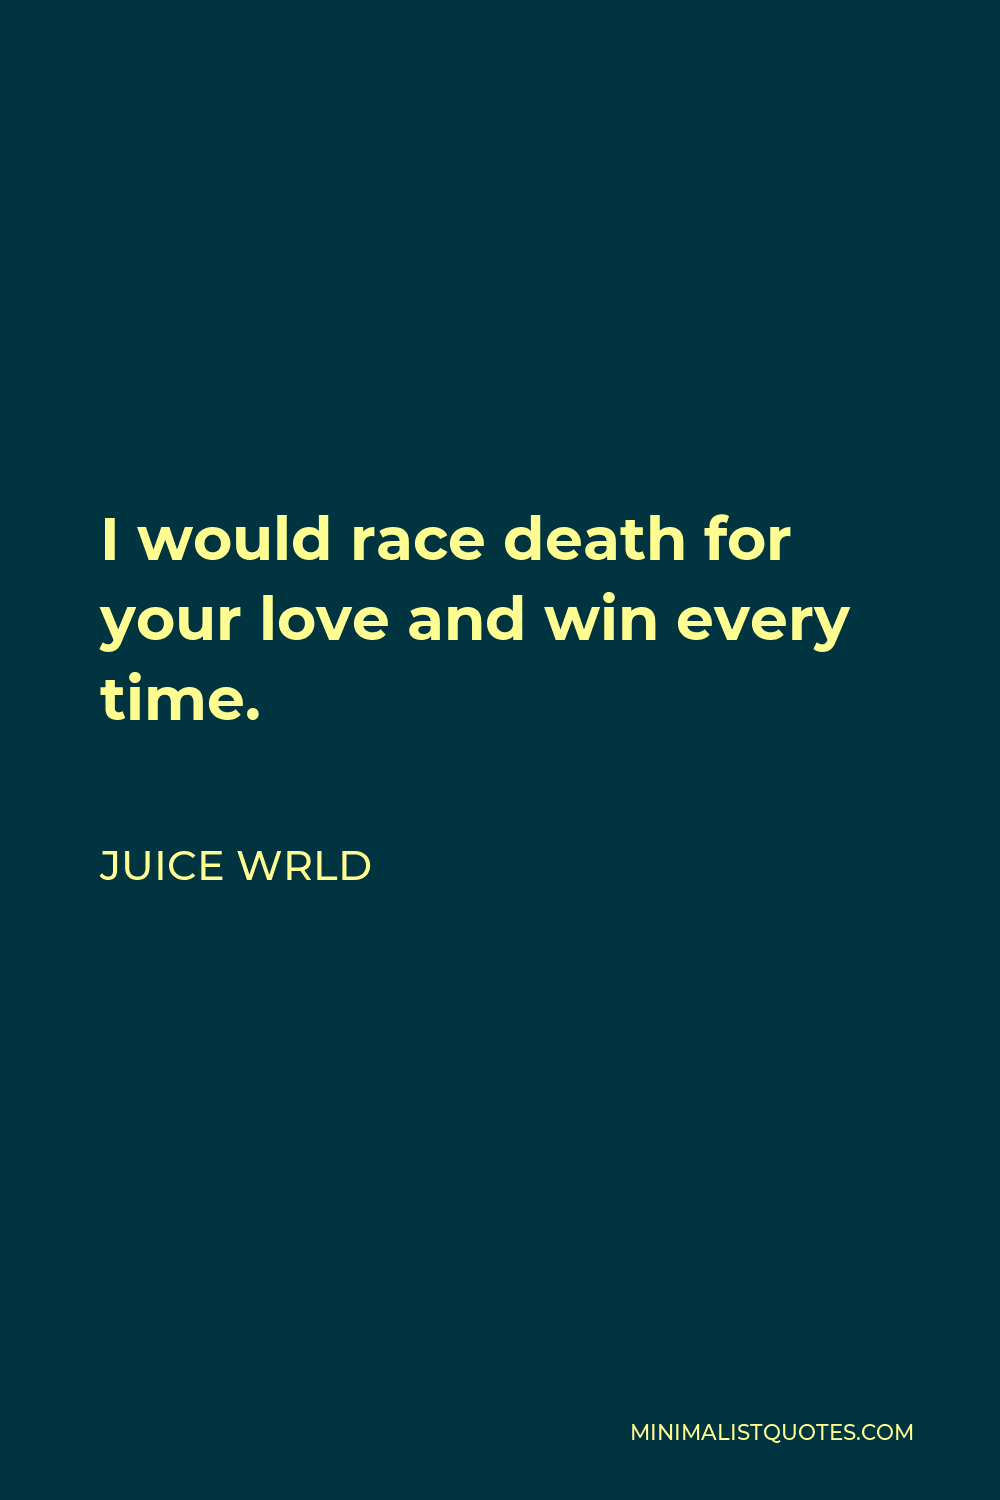 Juice Wrld Quote - I would race death for your love and win every time.